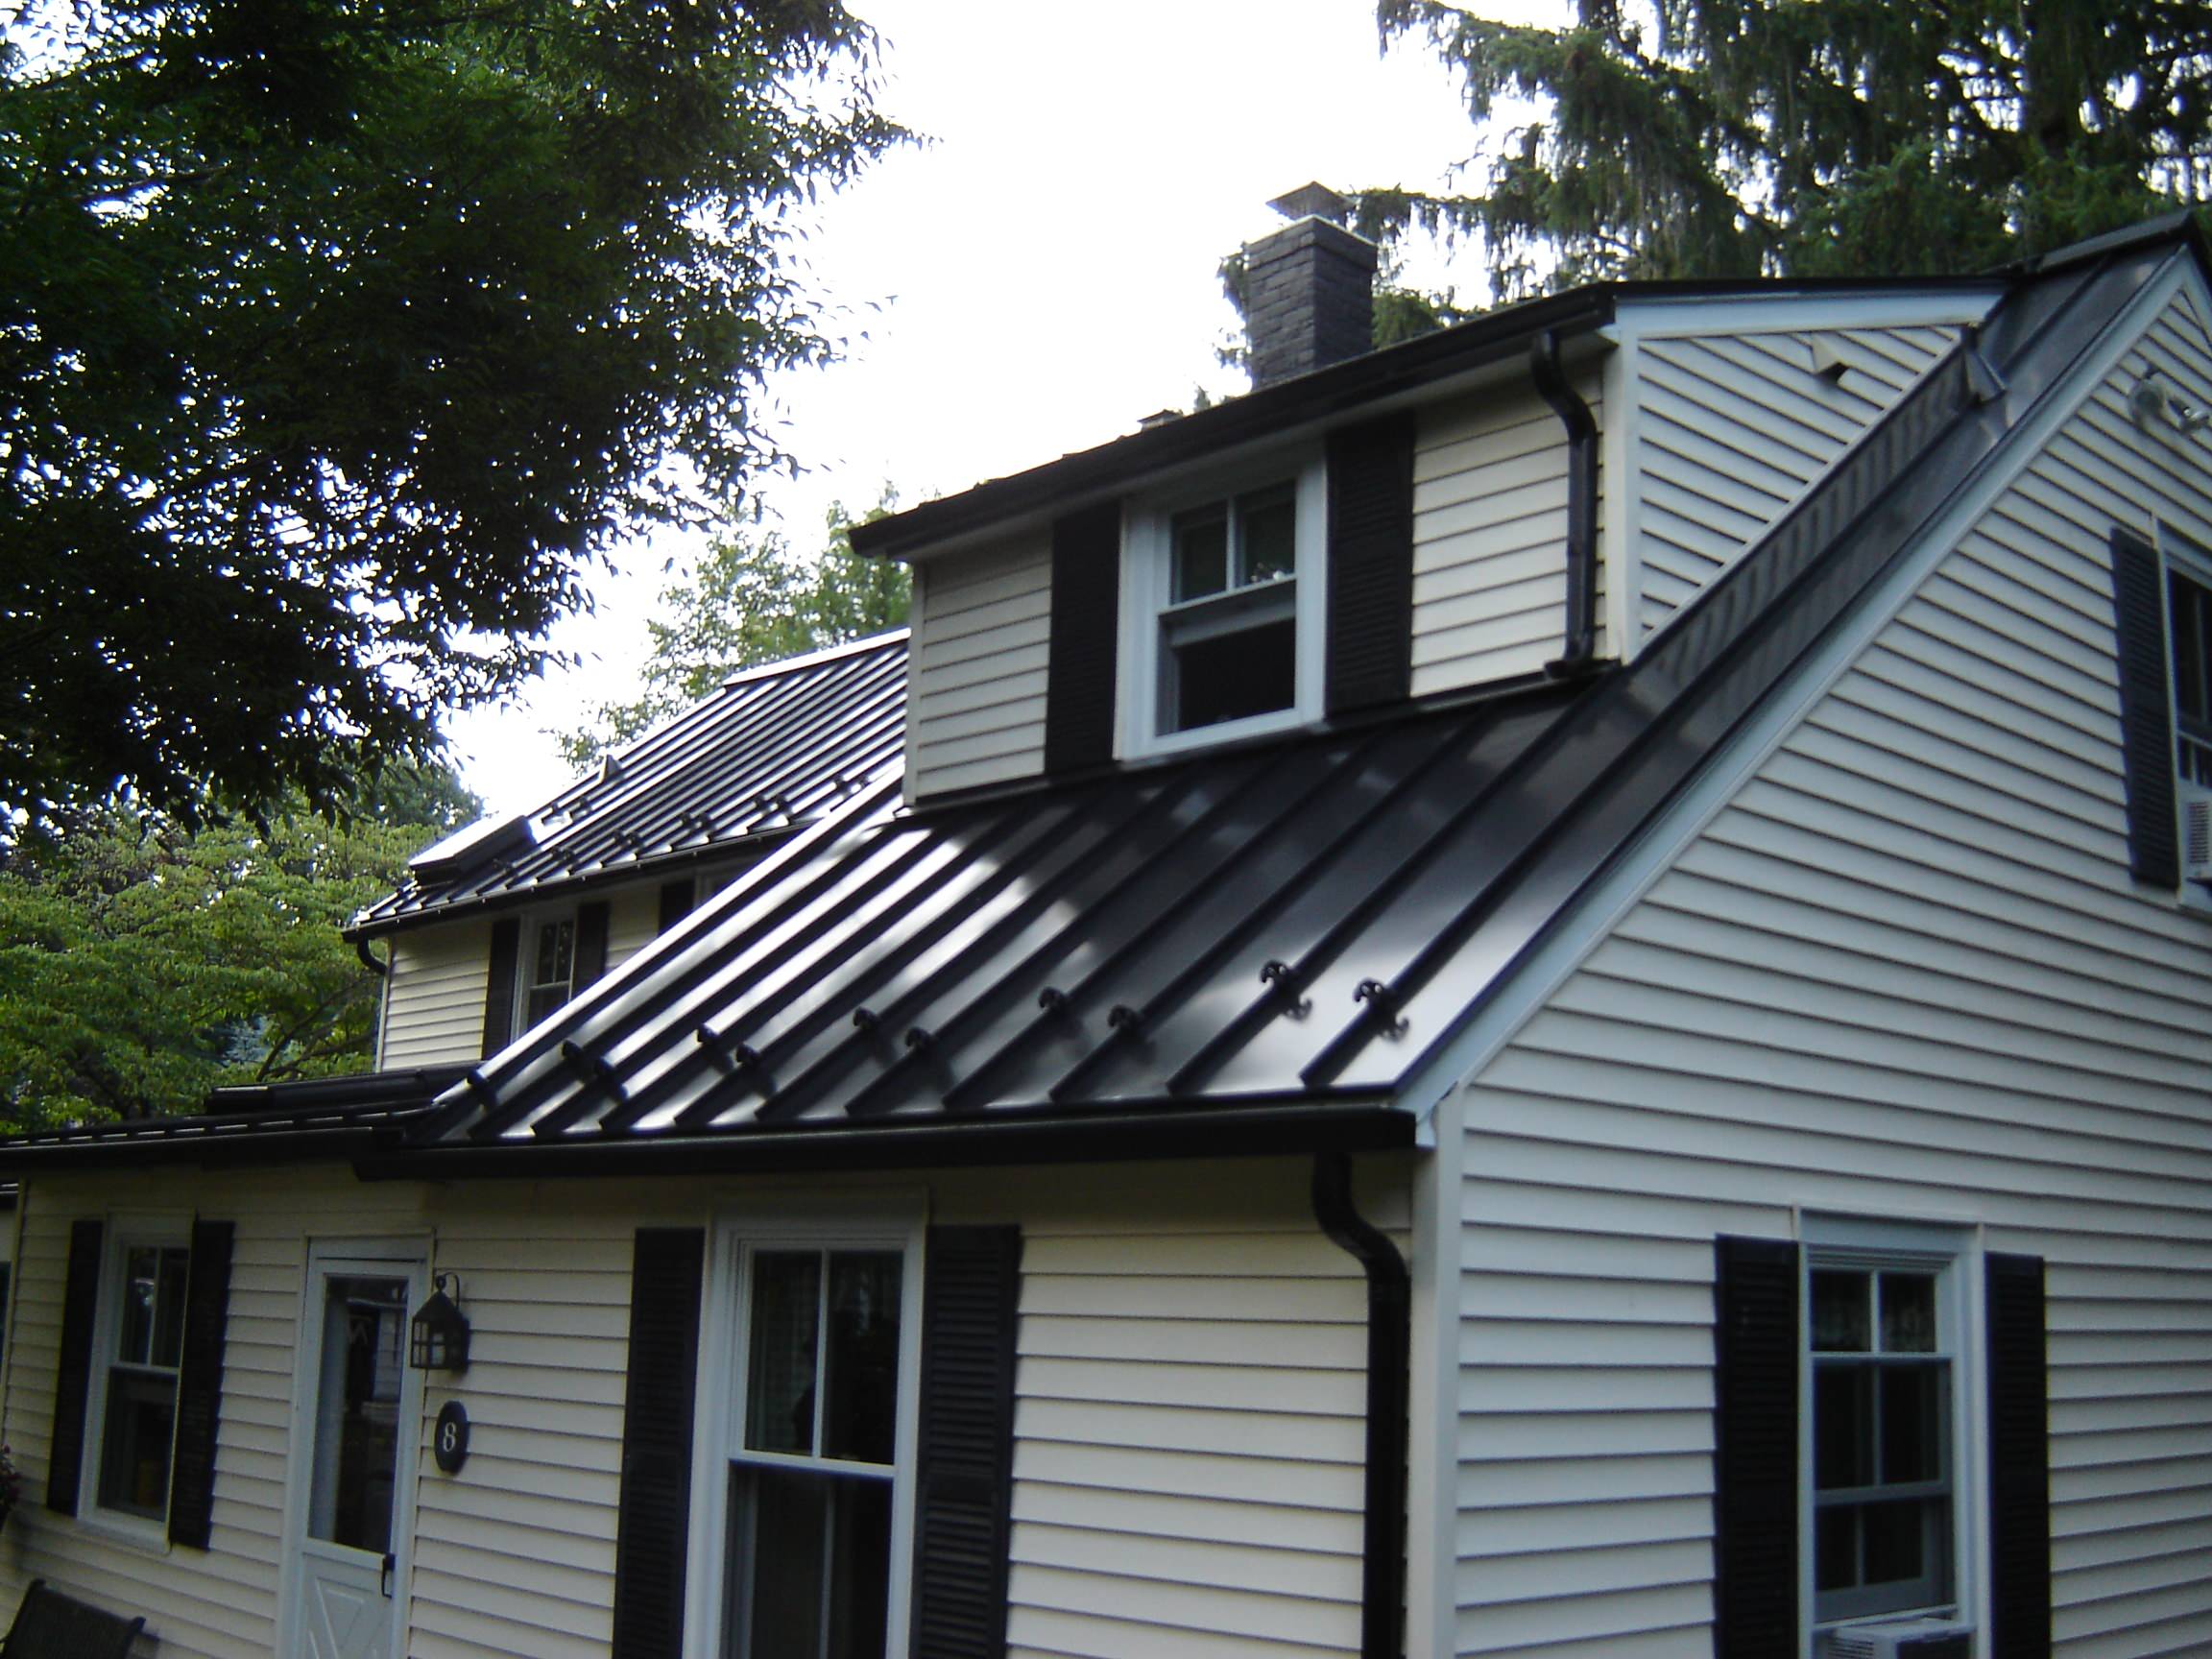 Metal roofs are hot, at least as a home improvement choice - - kpcnews.com